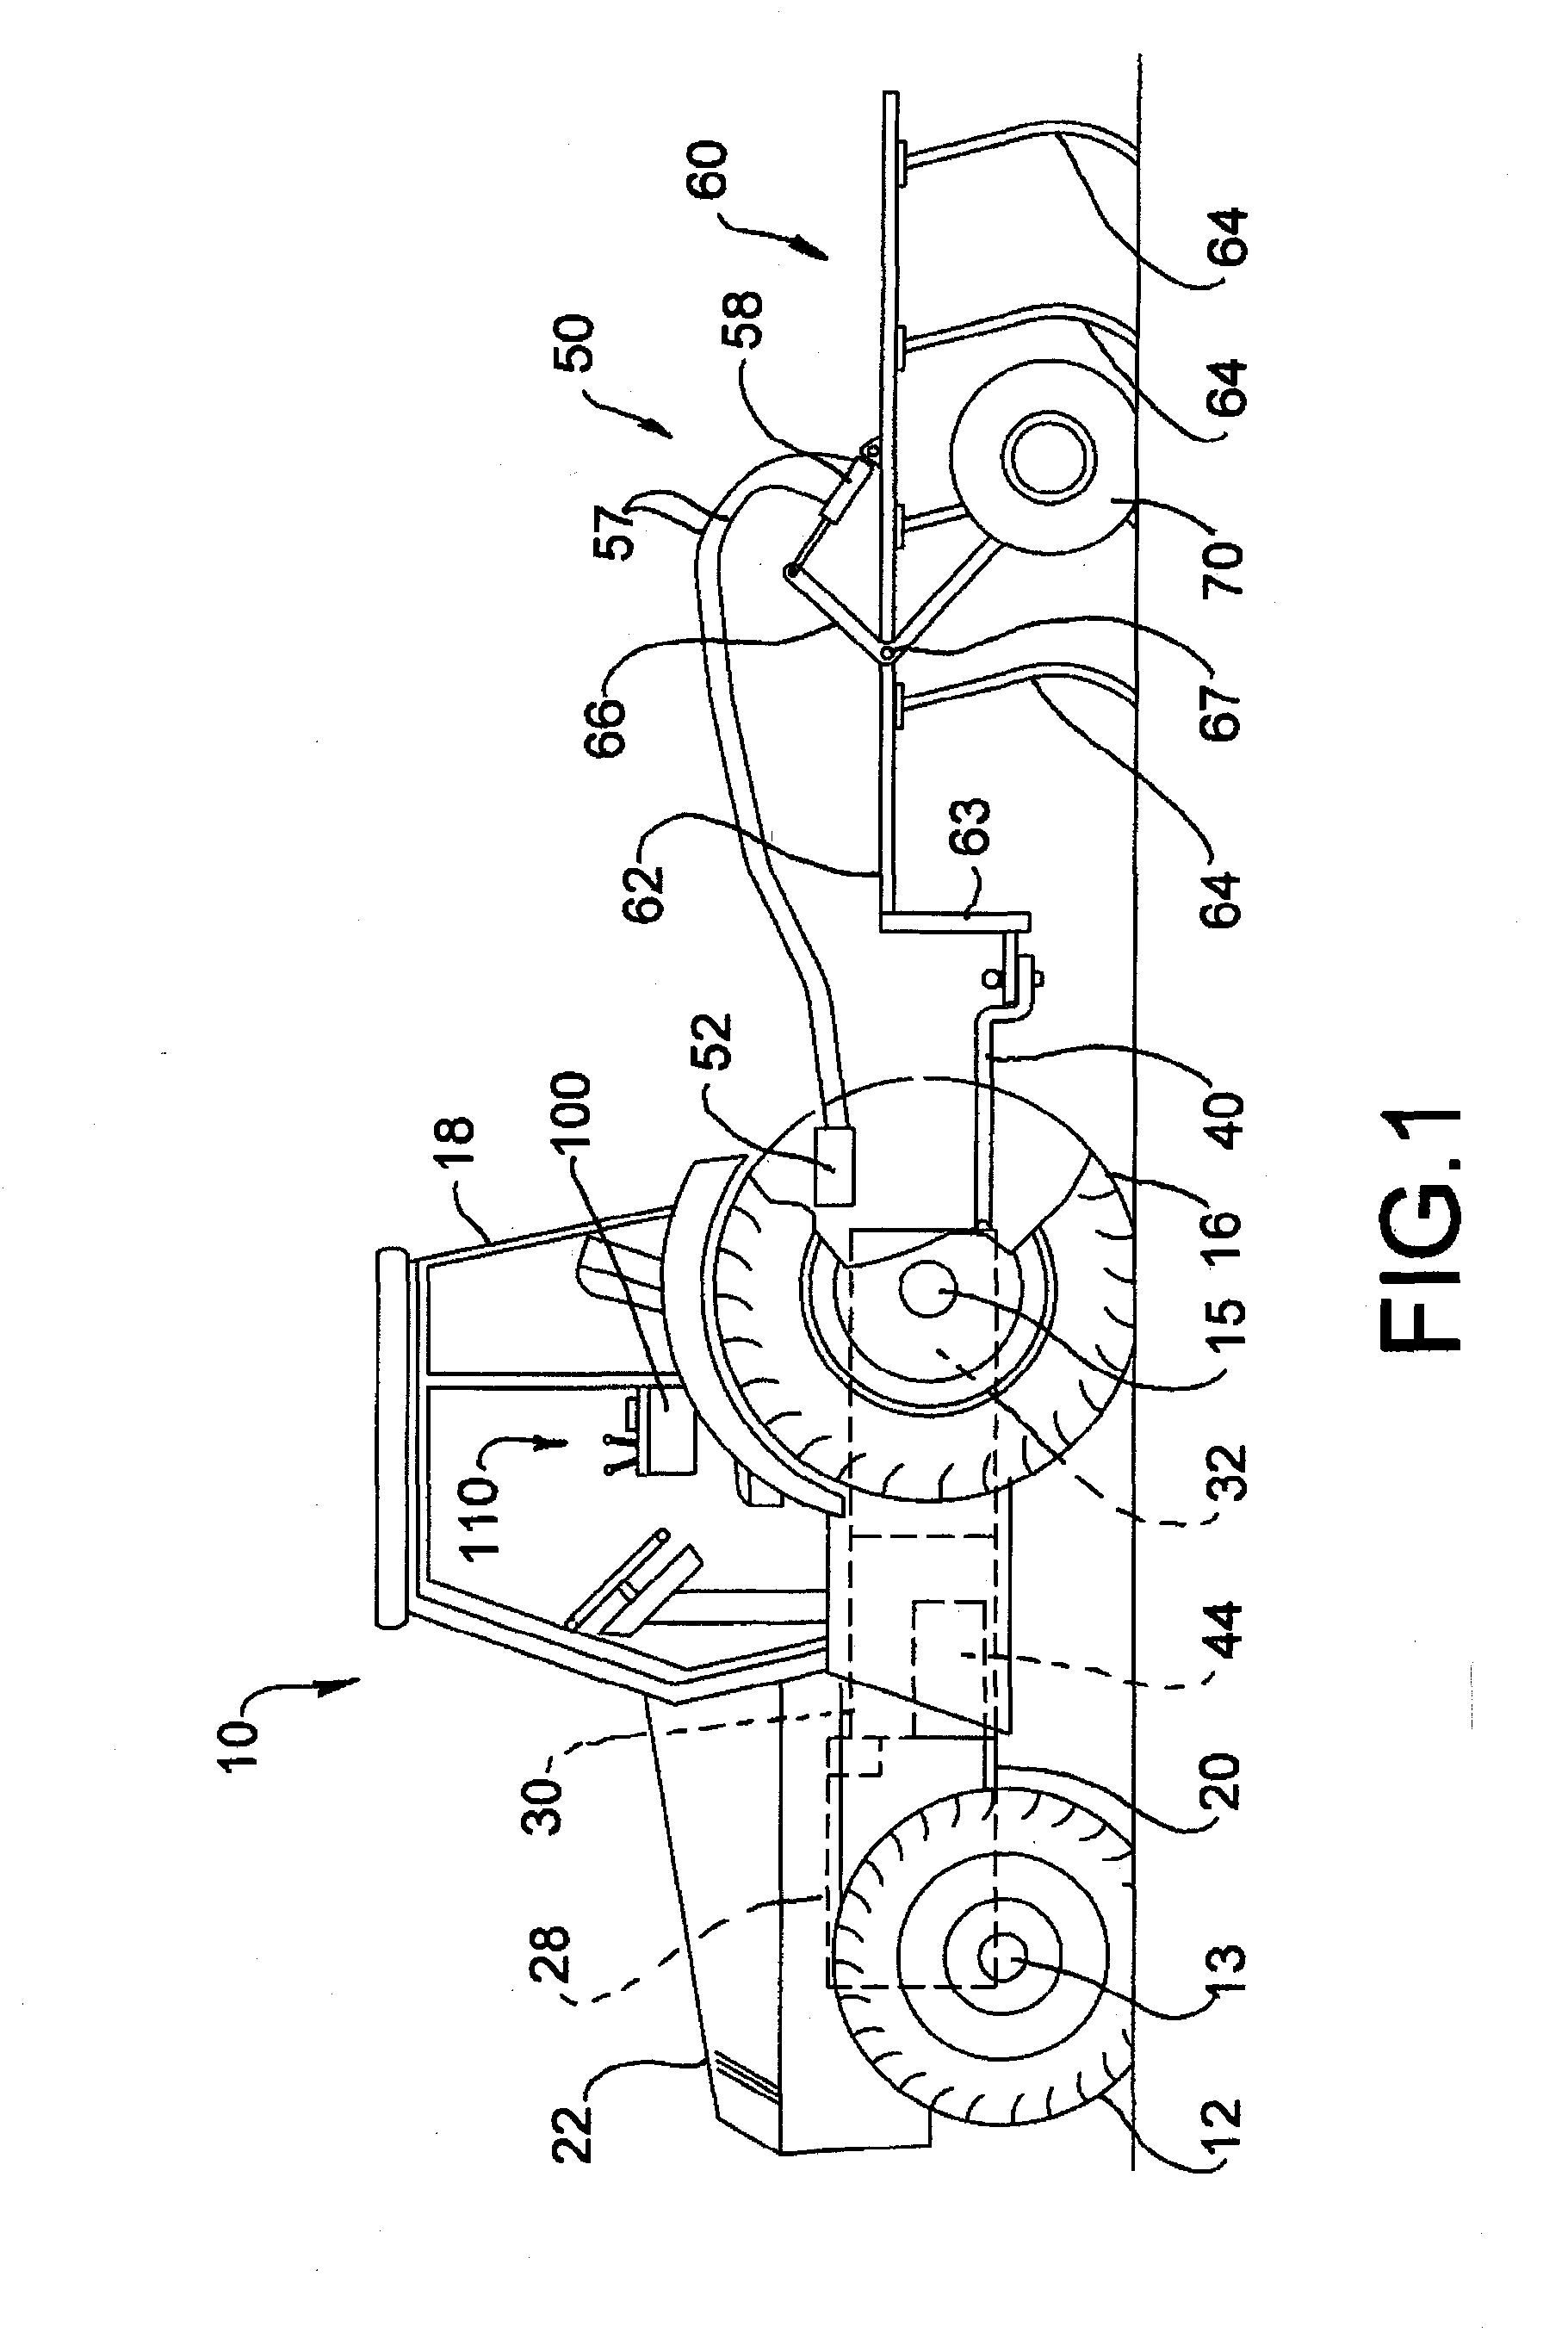 Electronic draft control for trailed implements